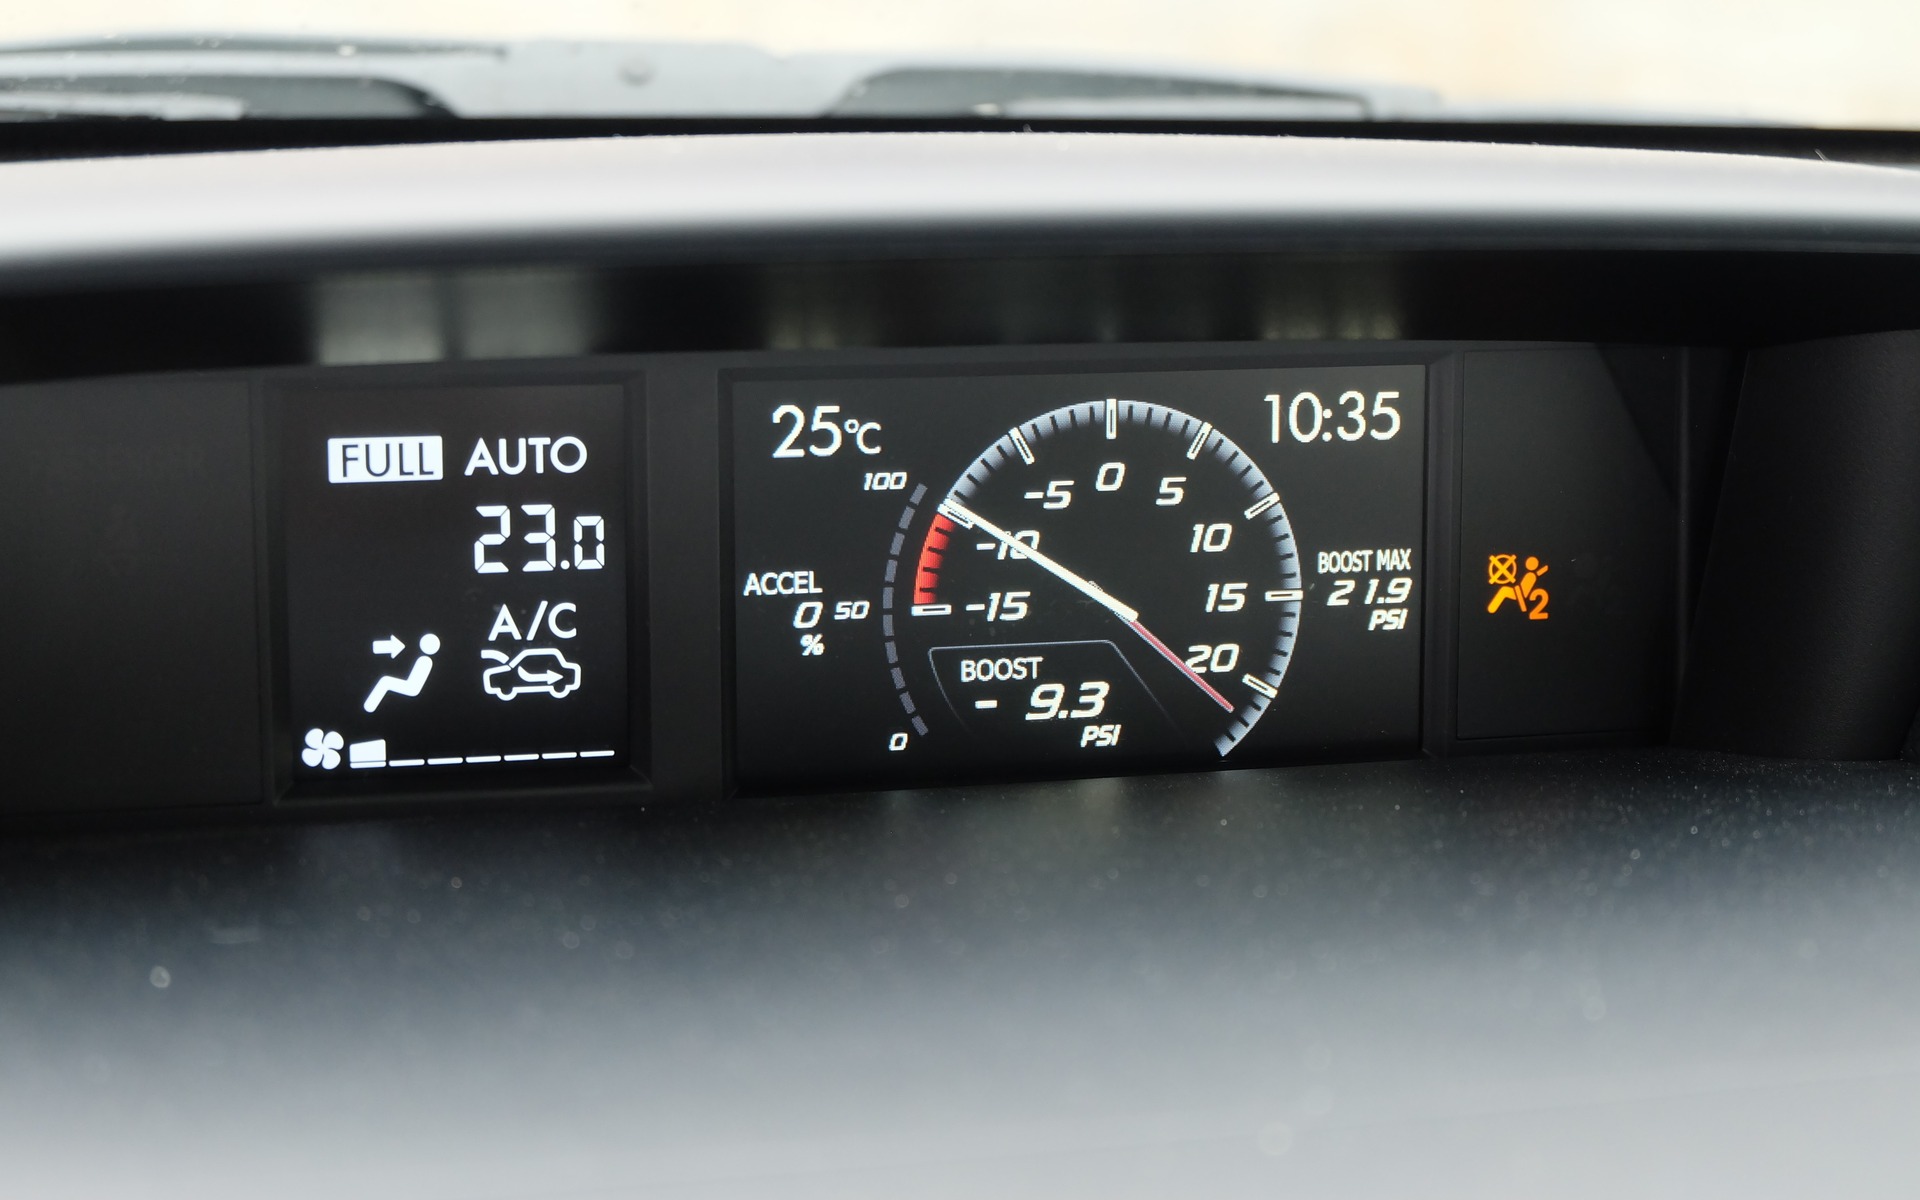 In the centre screen, there is a digital boost gauge, among other things.